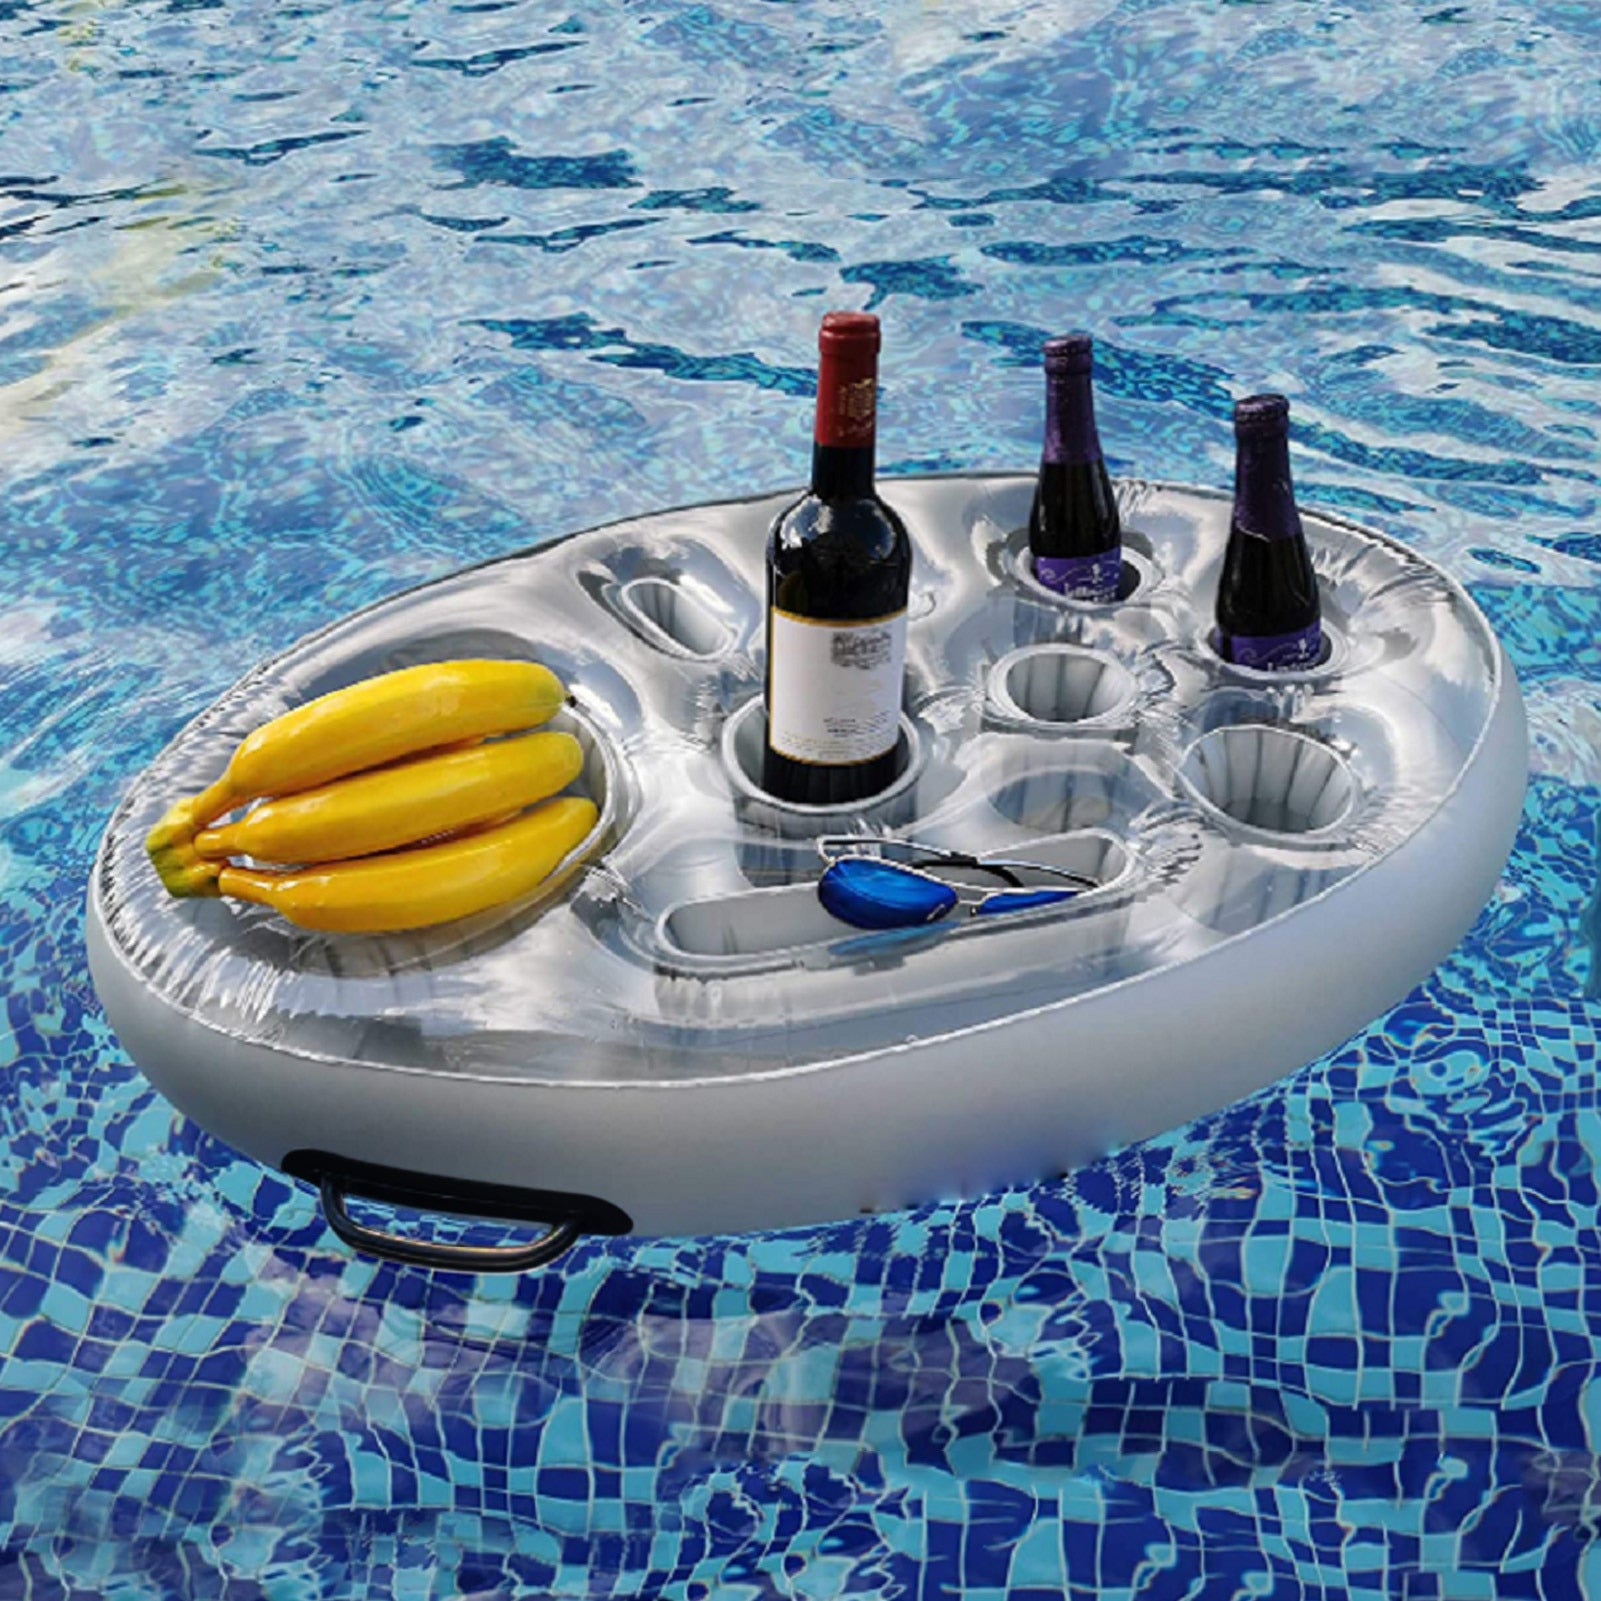 Inflatable Food and Drink Pool Float